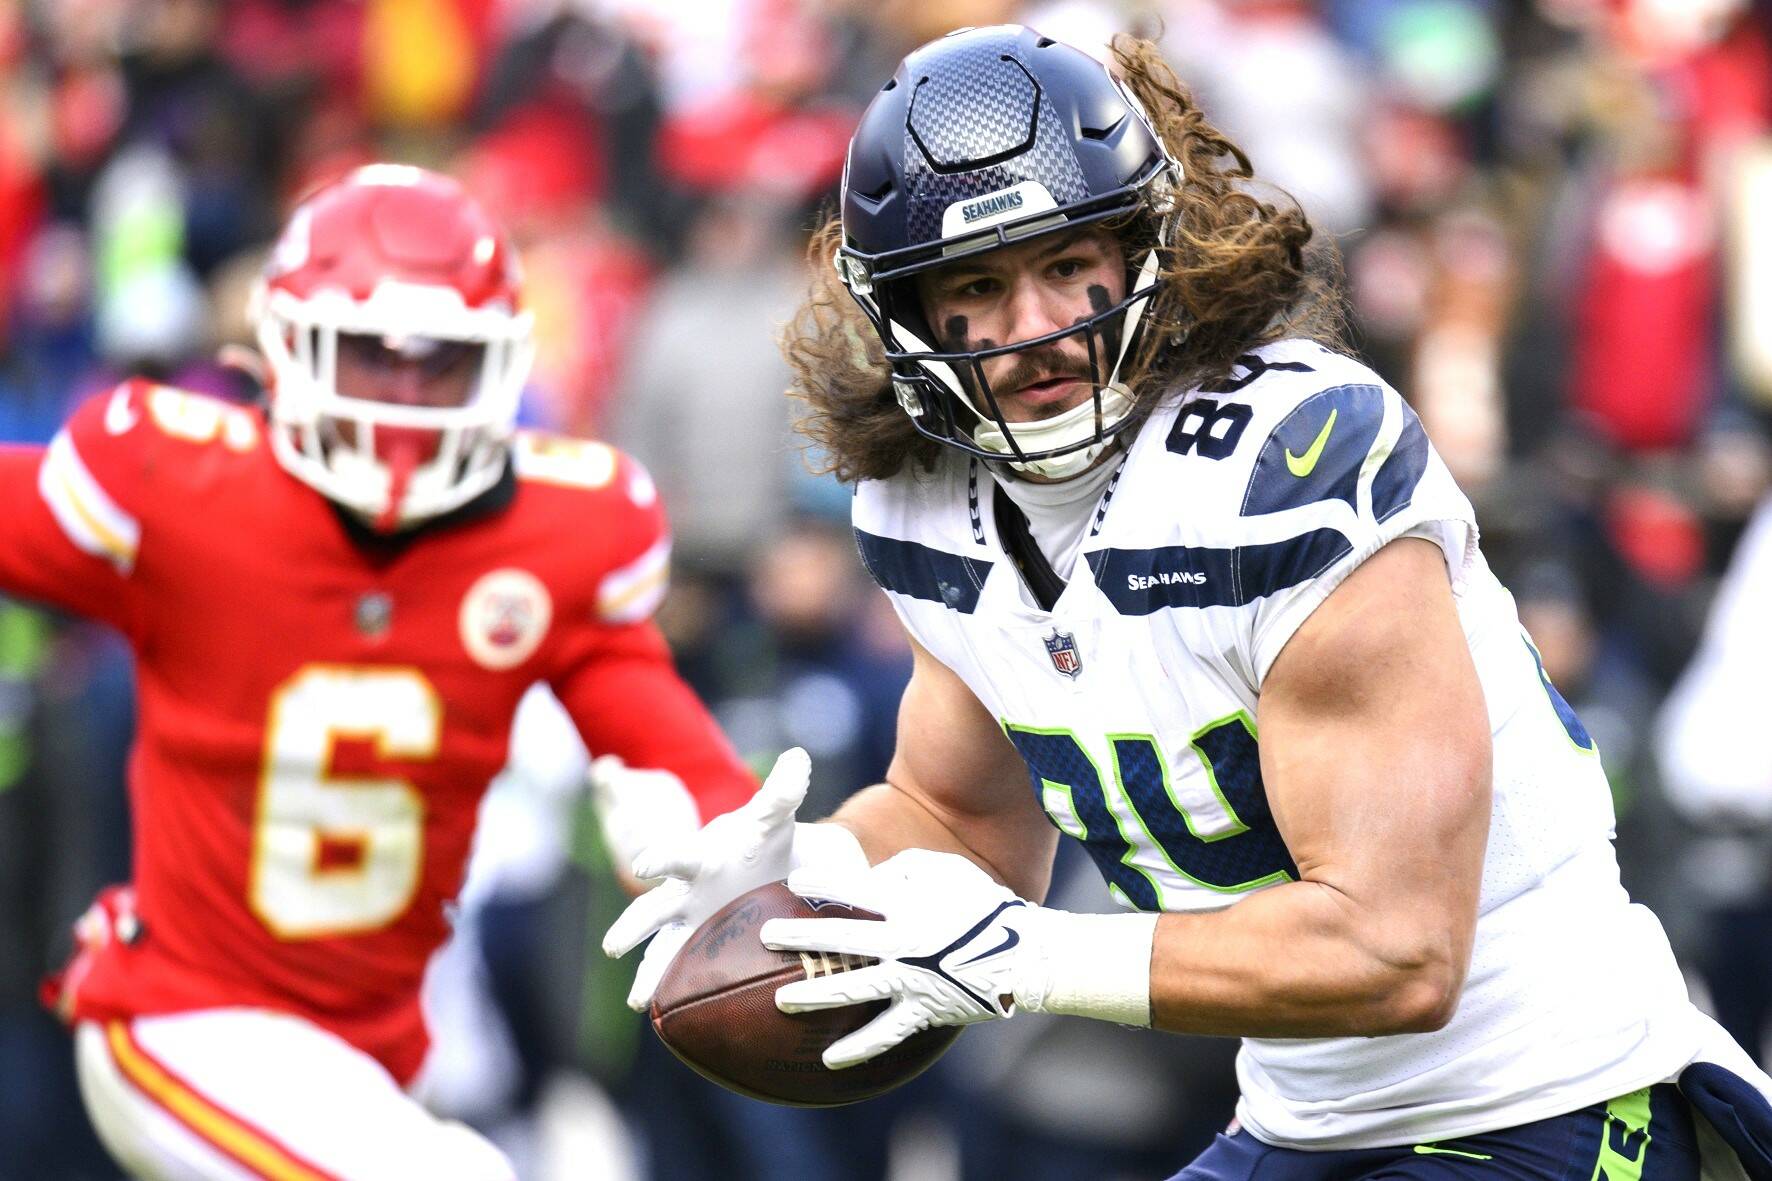 Seattle Seahawks tight end Colby Parkinson (84) makes a catch for a first down against the Kansas City Chiefs on  Saturday in Kansas City, Mo. Kansas City won the game 24-10. (Reed Hoffmann/The Associated Press)